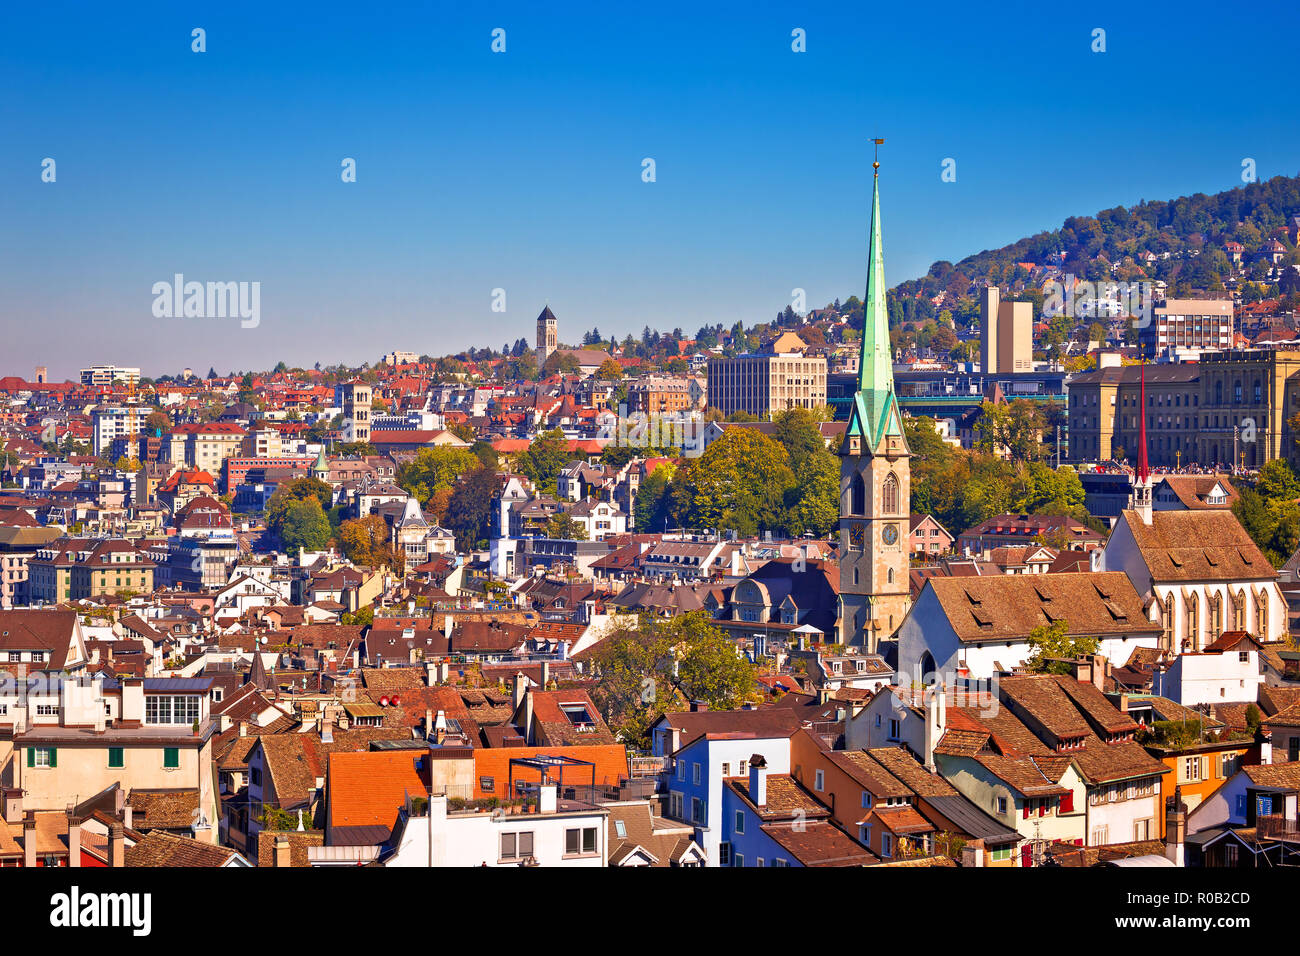 Zurich rooftops and cityscape view, central Switzerland Stock Photo